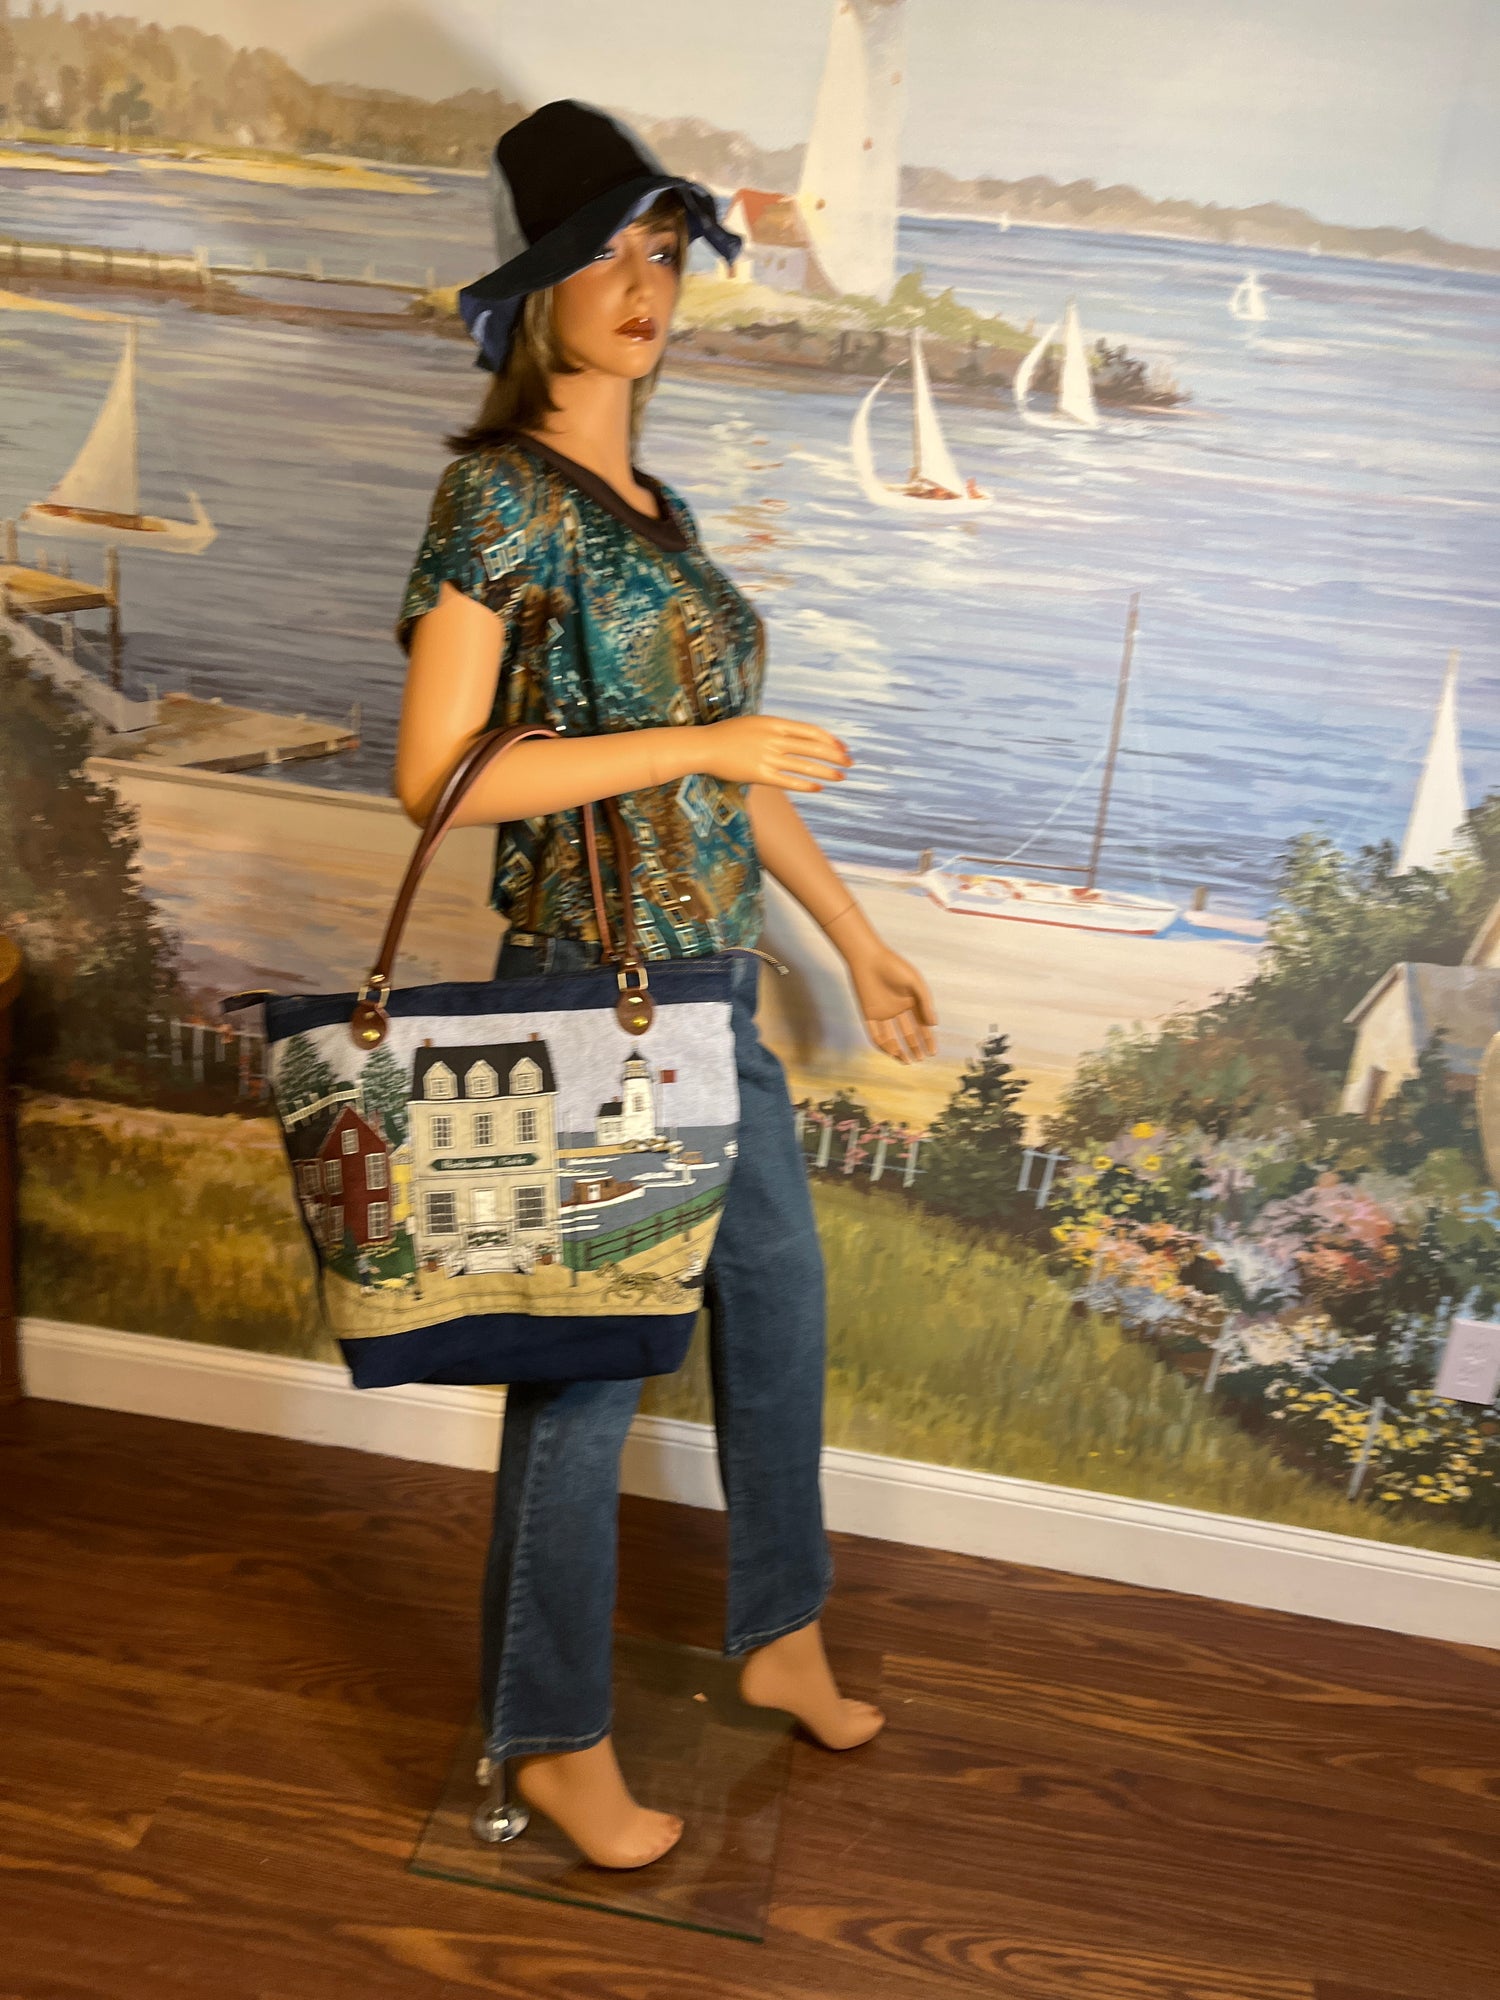 Tapestry, Nautical Upcycled Totes